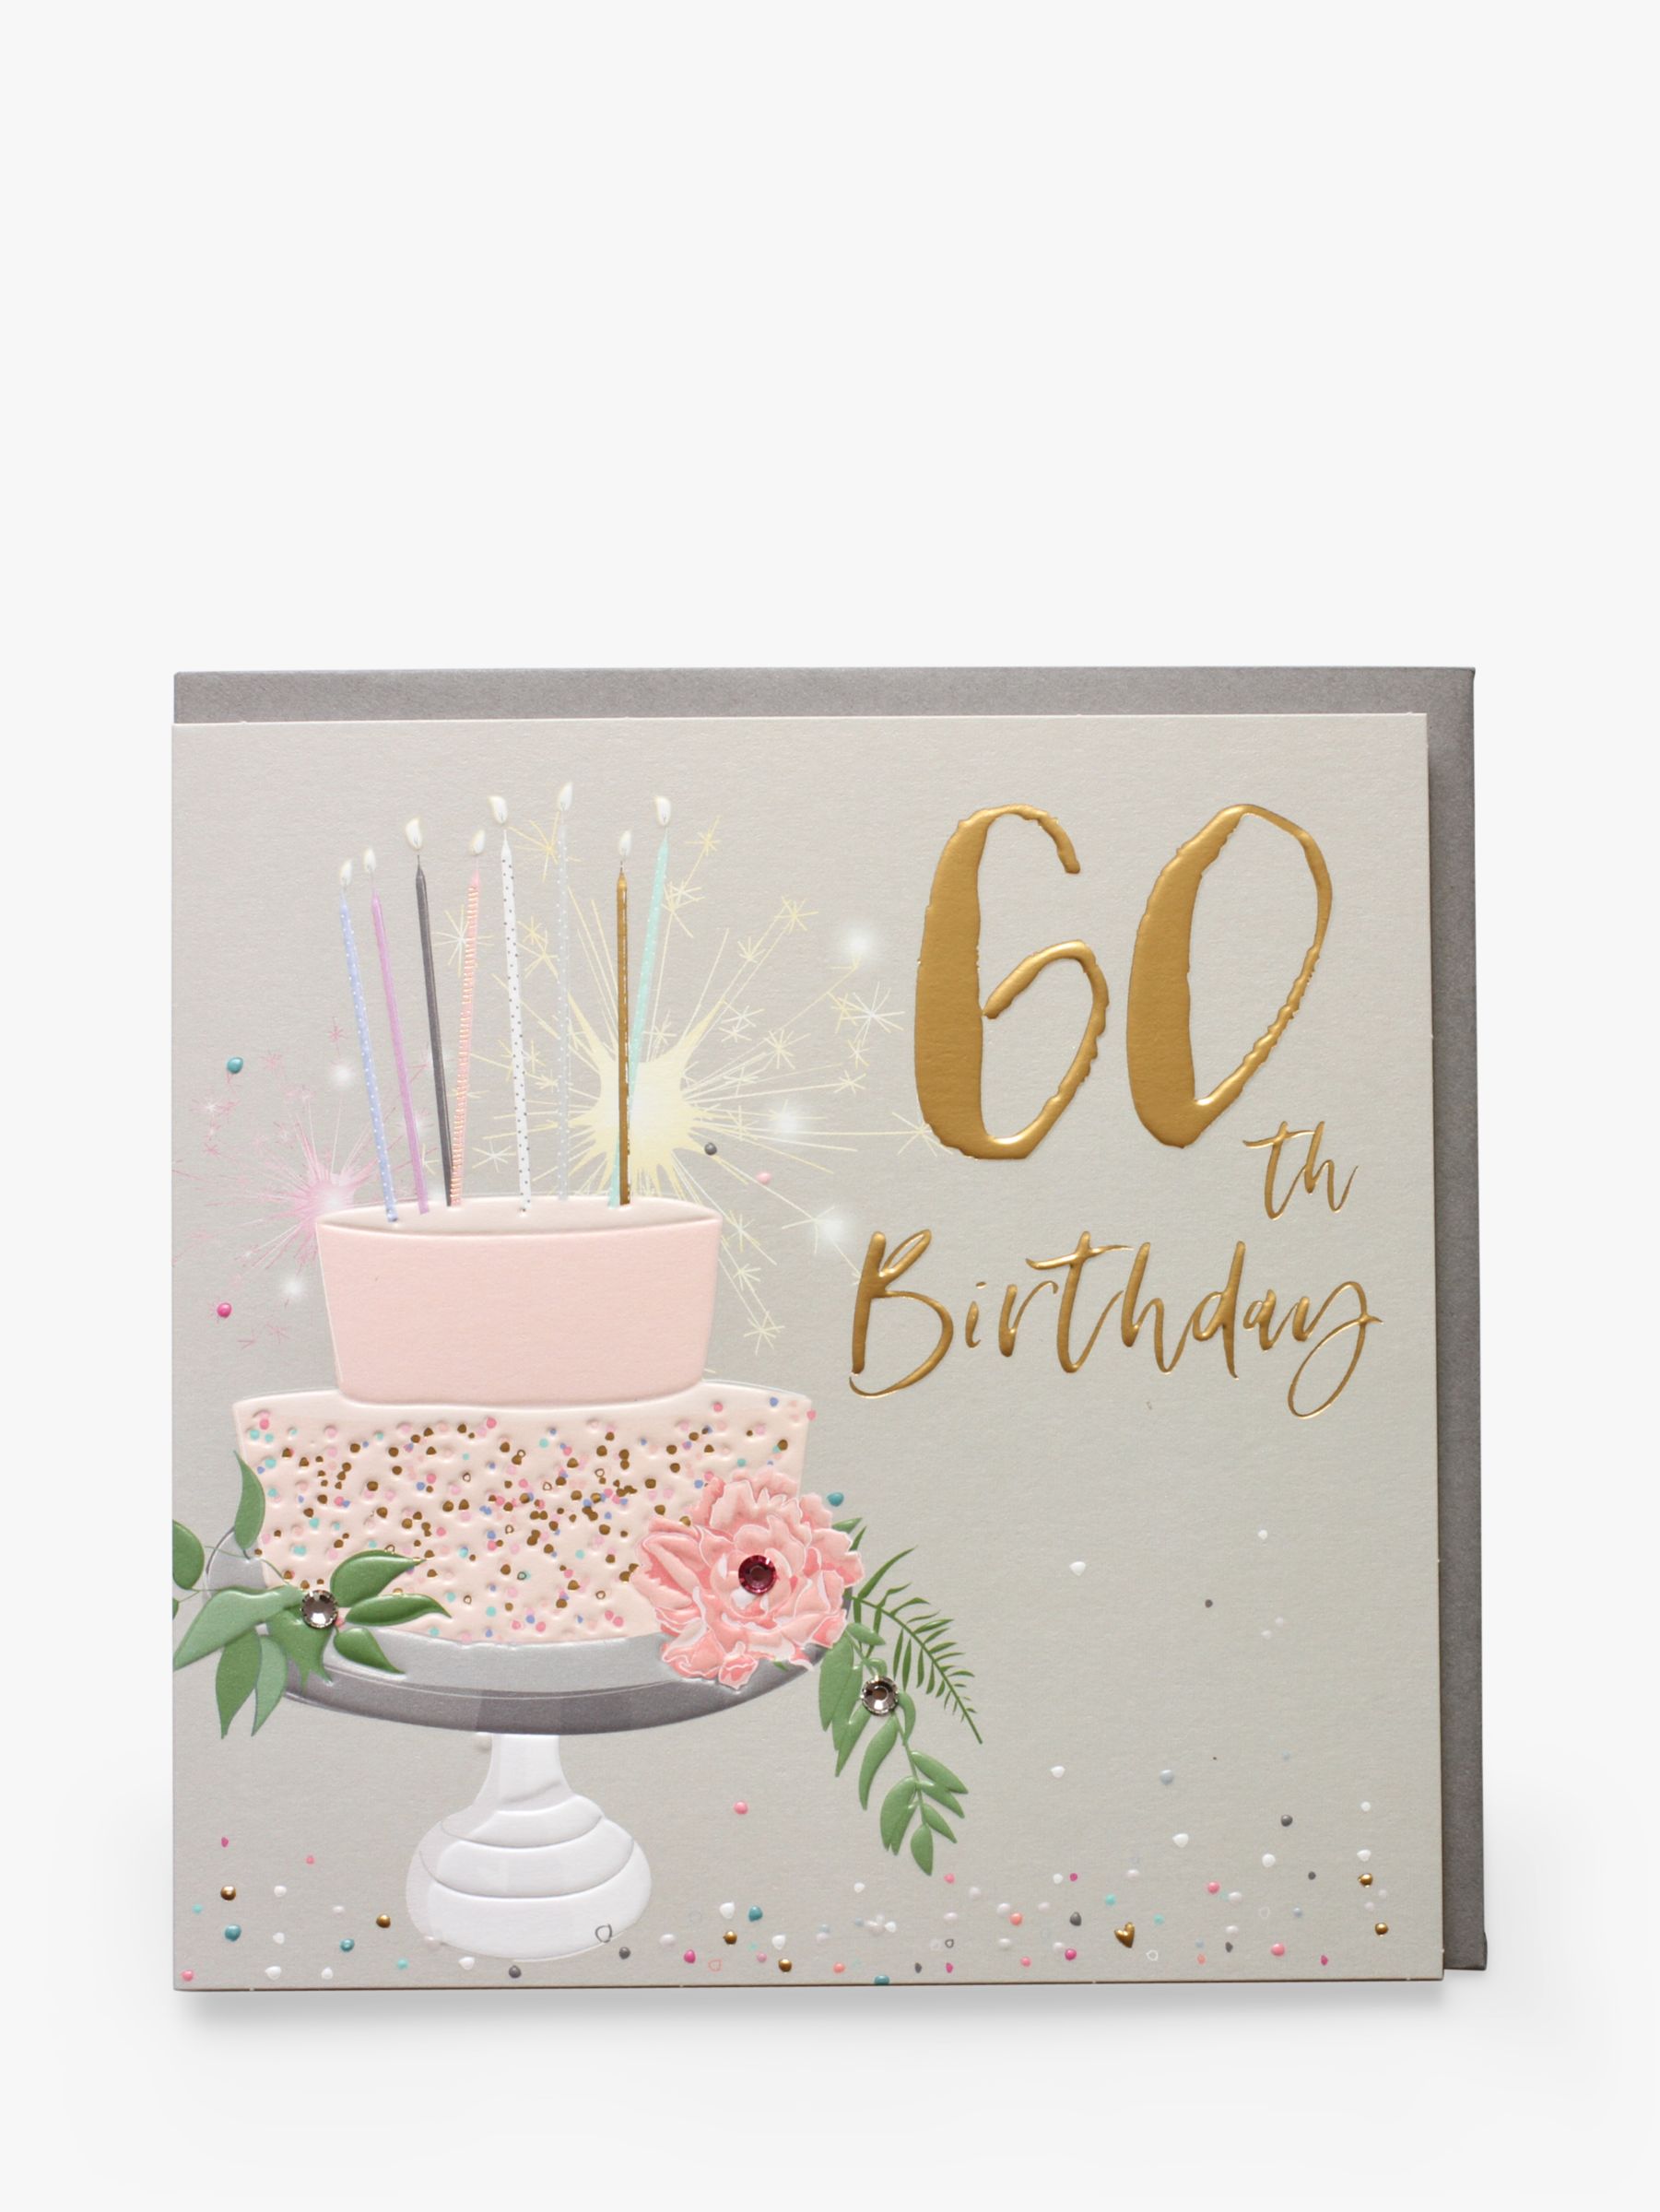 Belly Button Designs Cake 60th  Birthday Card at John  Lewis  